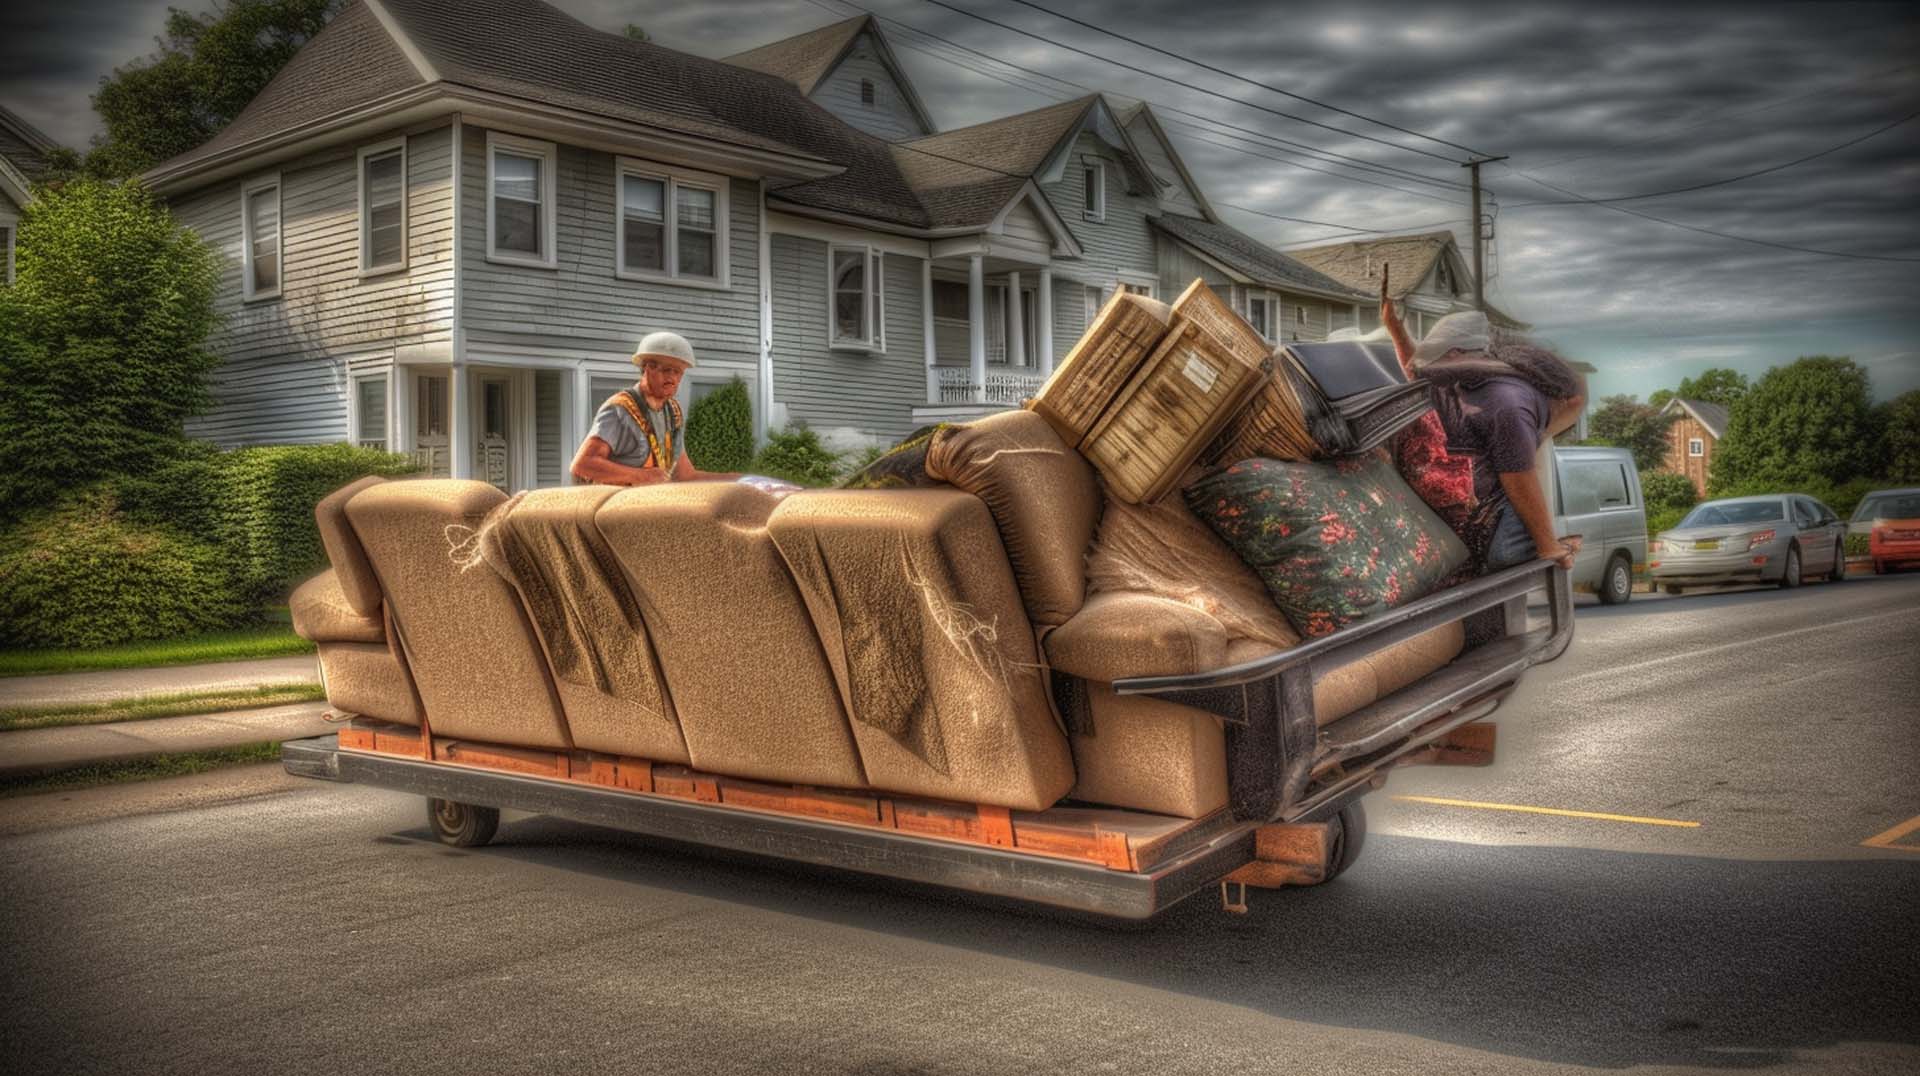 Residential Junk Removal Services in LaSalle